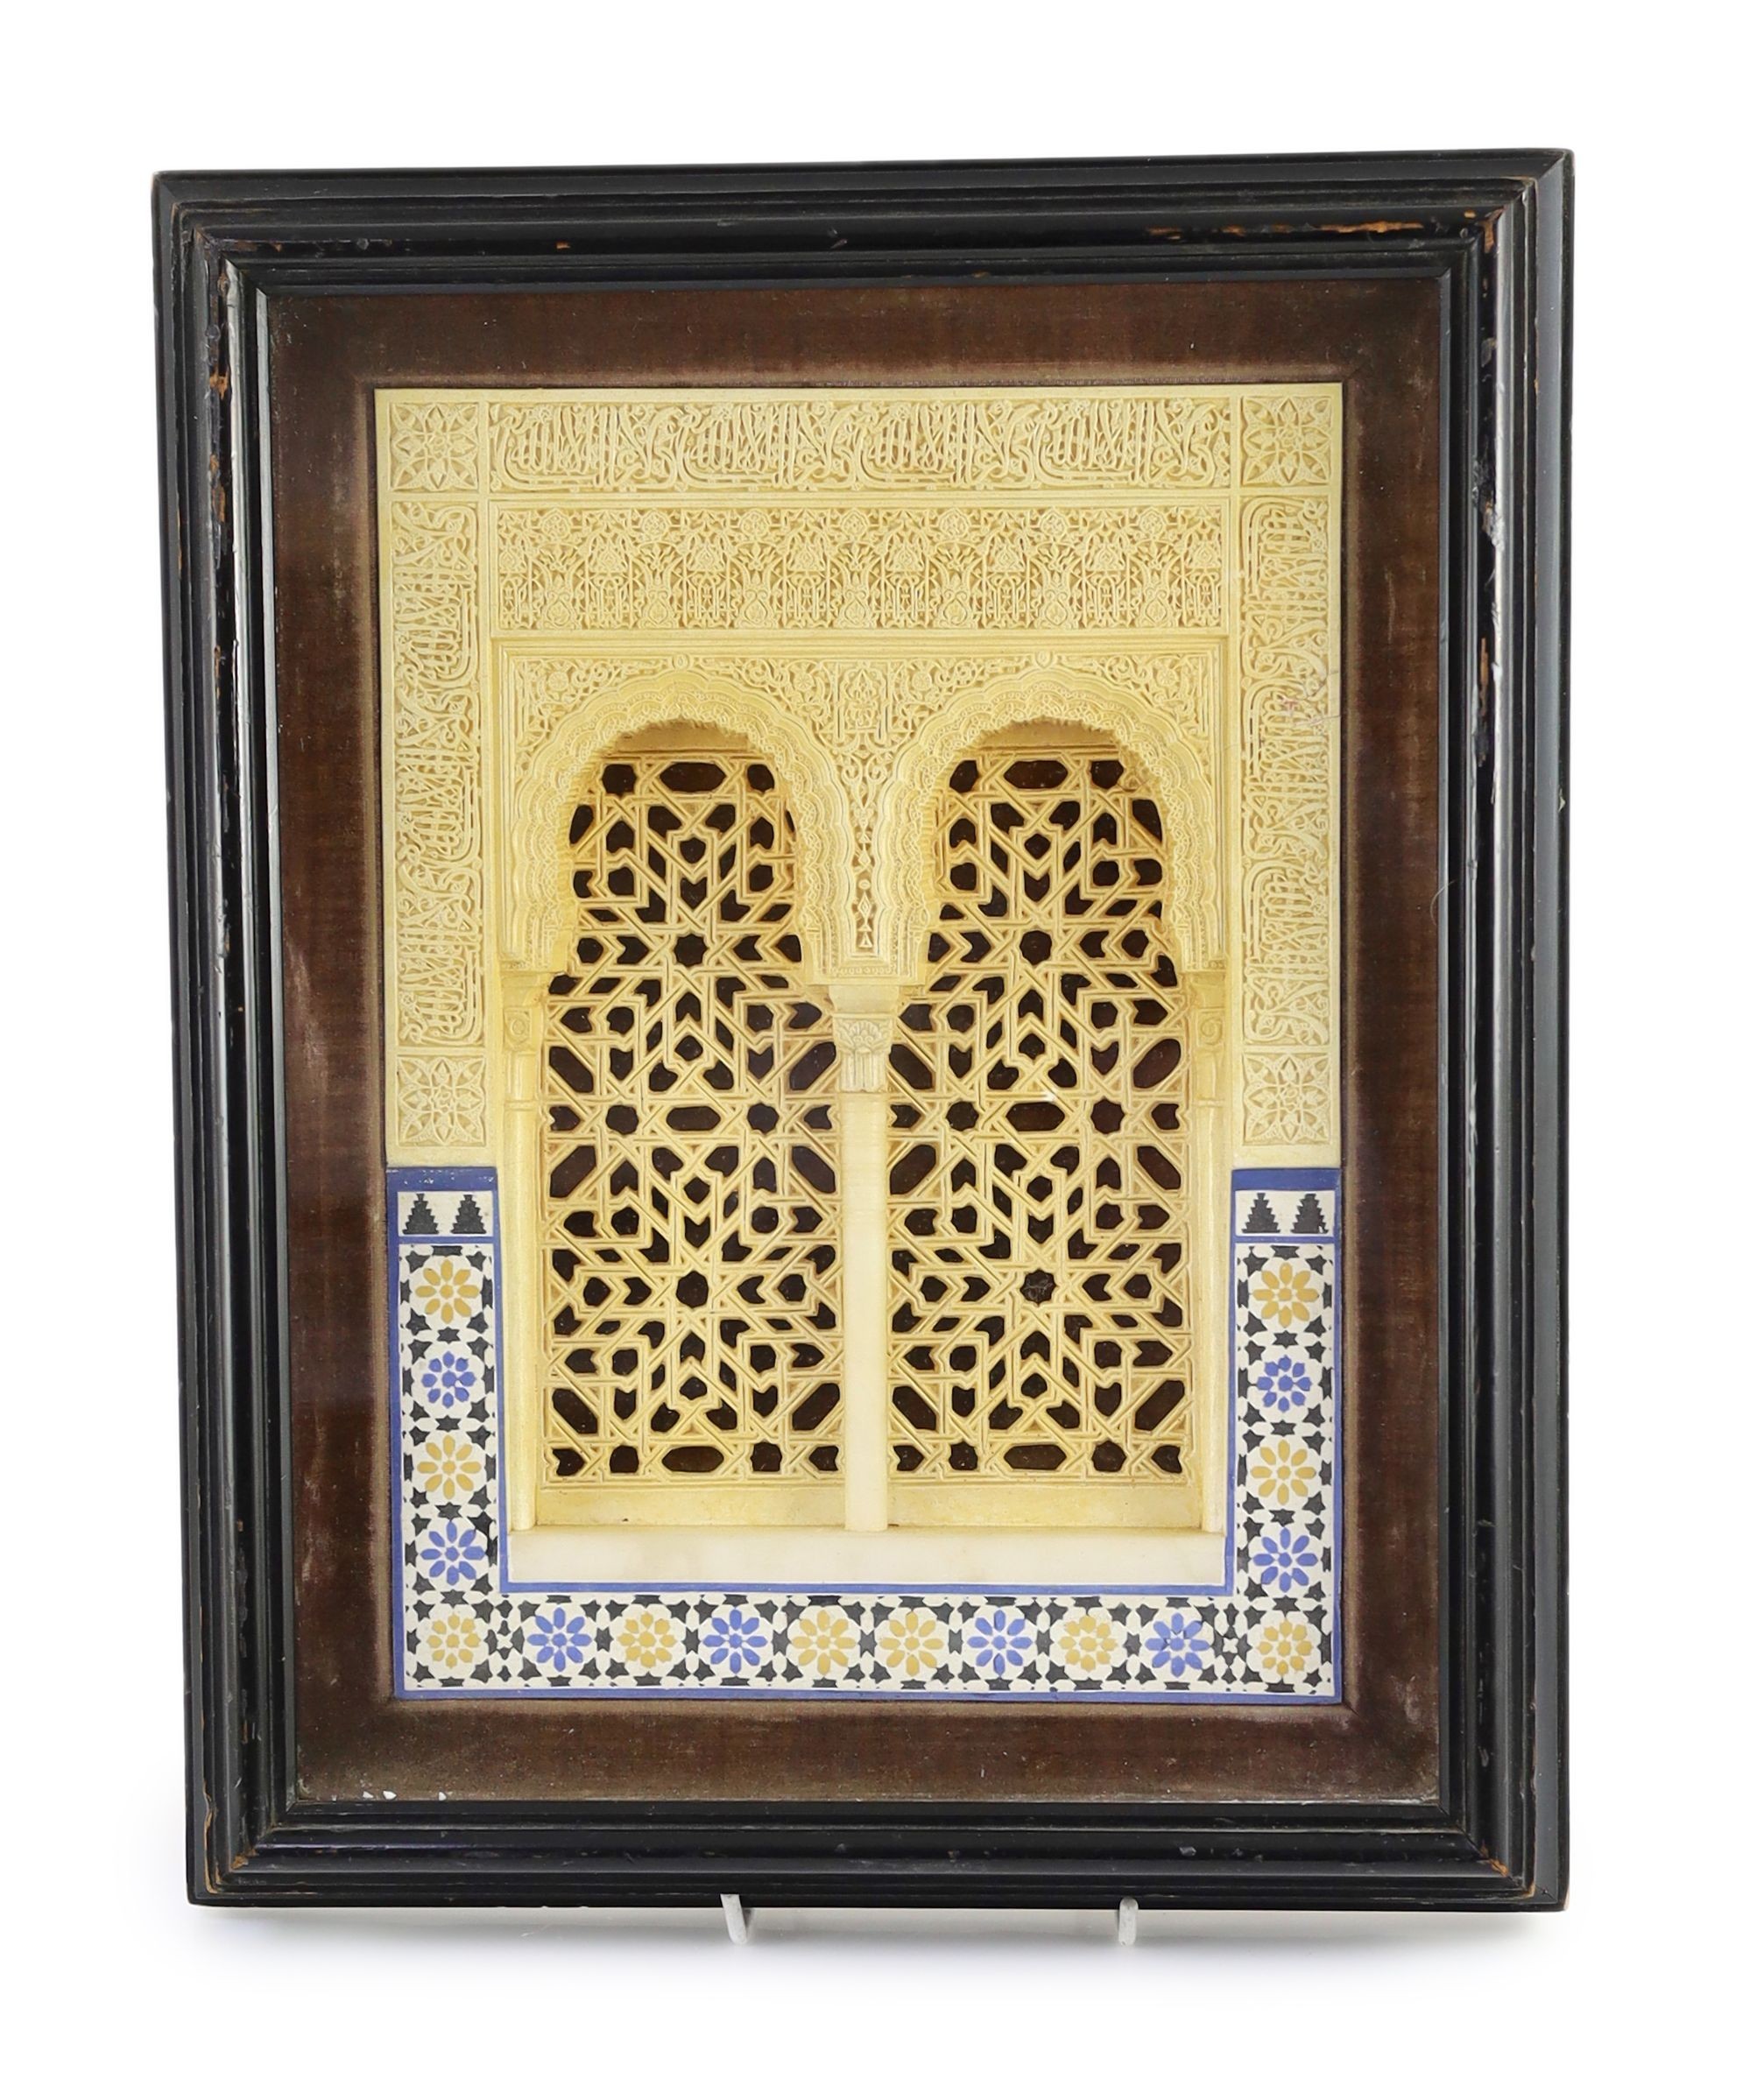 A 19th century Spanish Rafael Contreras plaster, alabaster and bisque twin arched facade, 29 x 21 cm plus frame